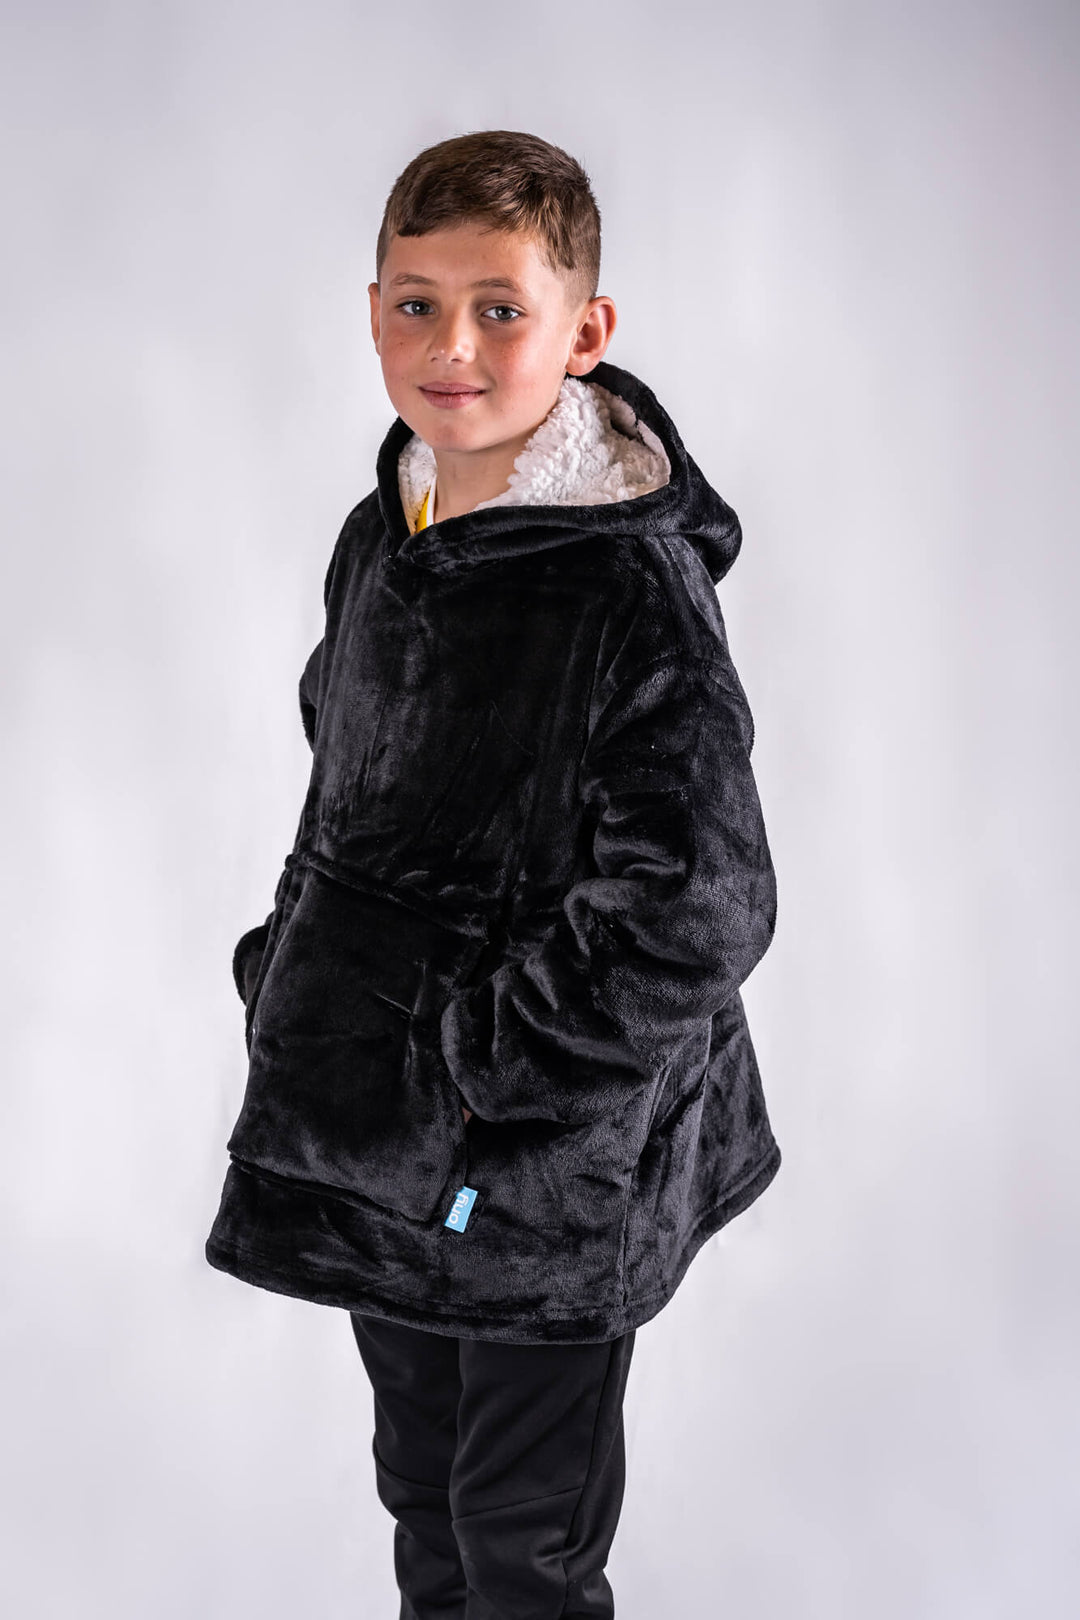 Kids & Little Ones Black Extra Thick Ony Hoodie Blanket - It's Ony